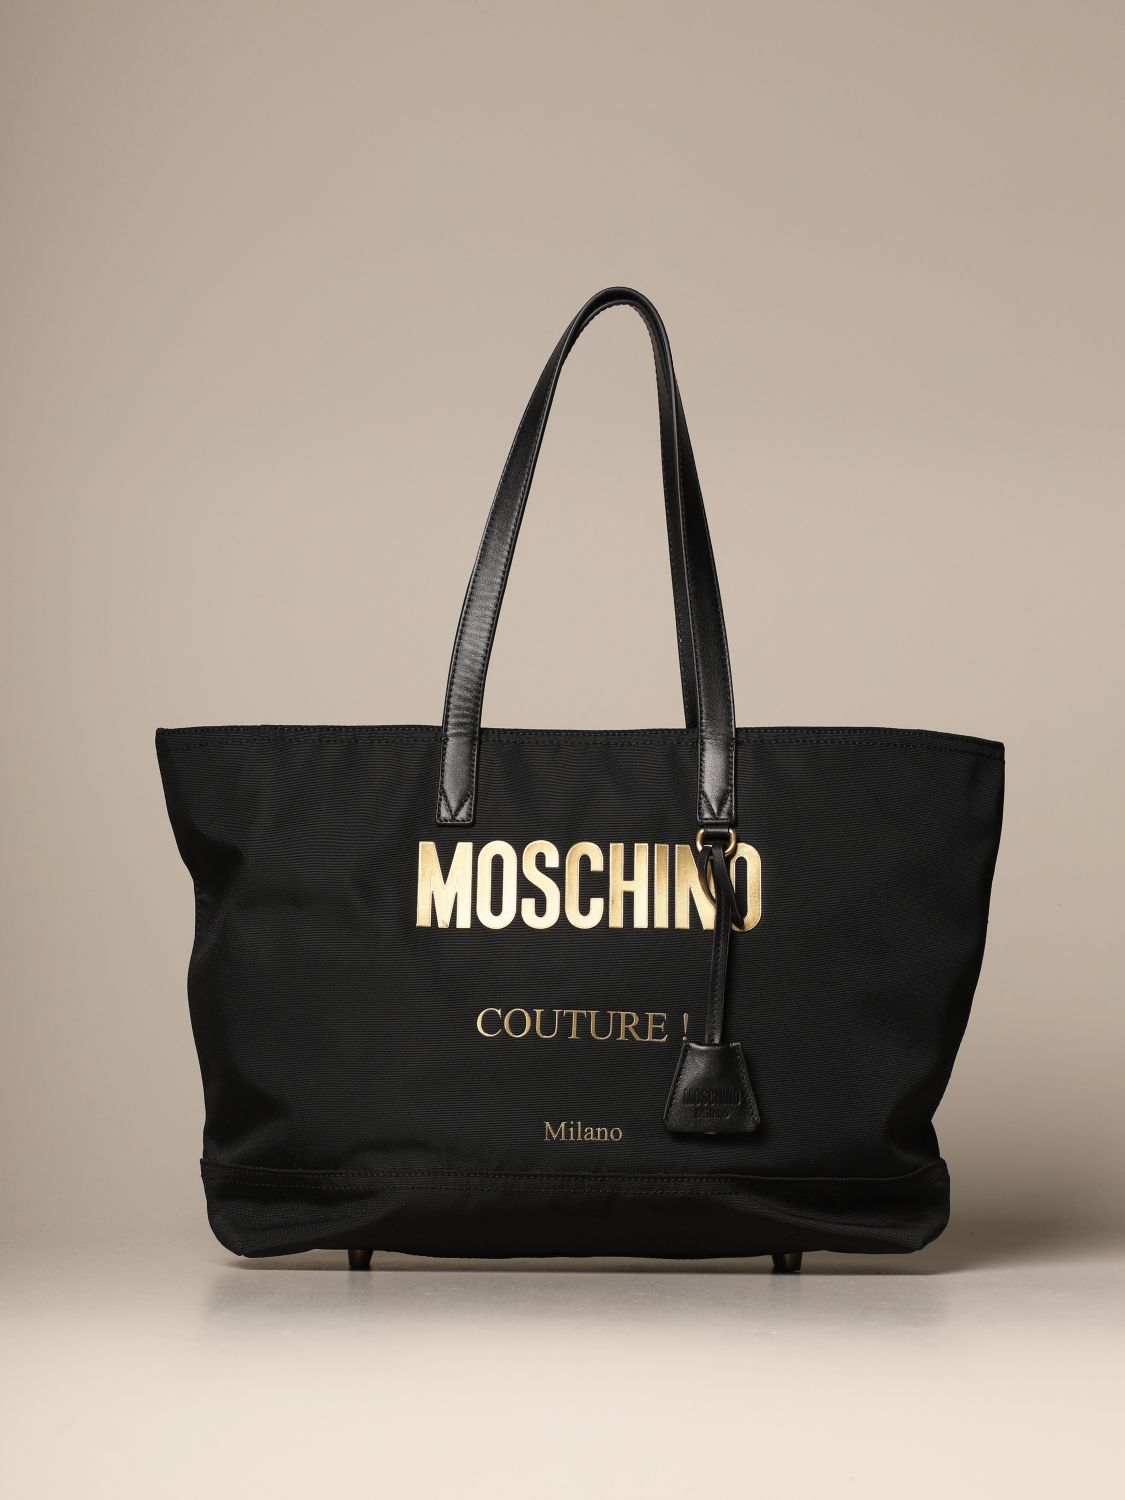 Moschino Couture Outlet: Shoulder bag women - Black | Tote Bags ...